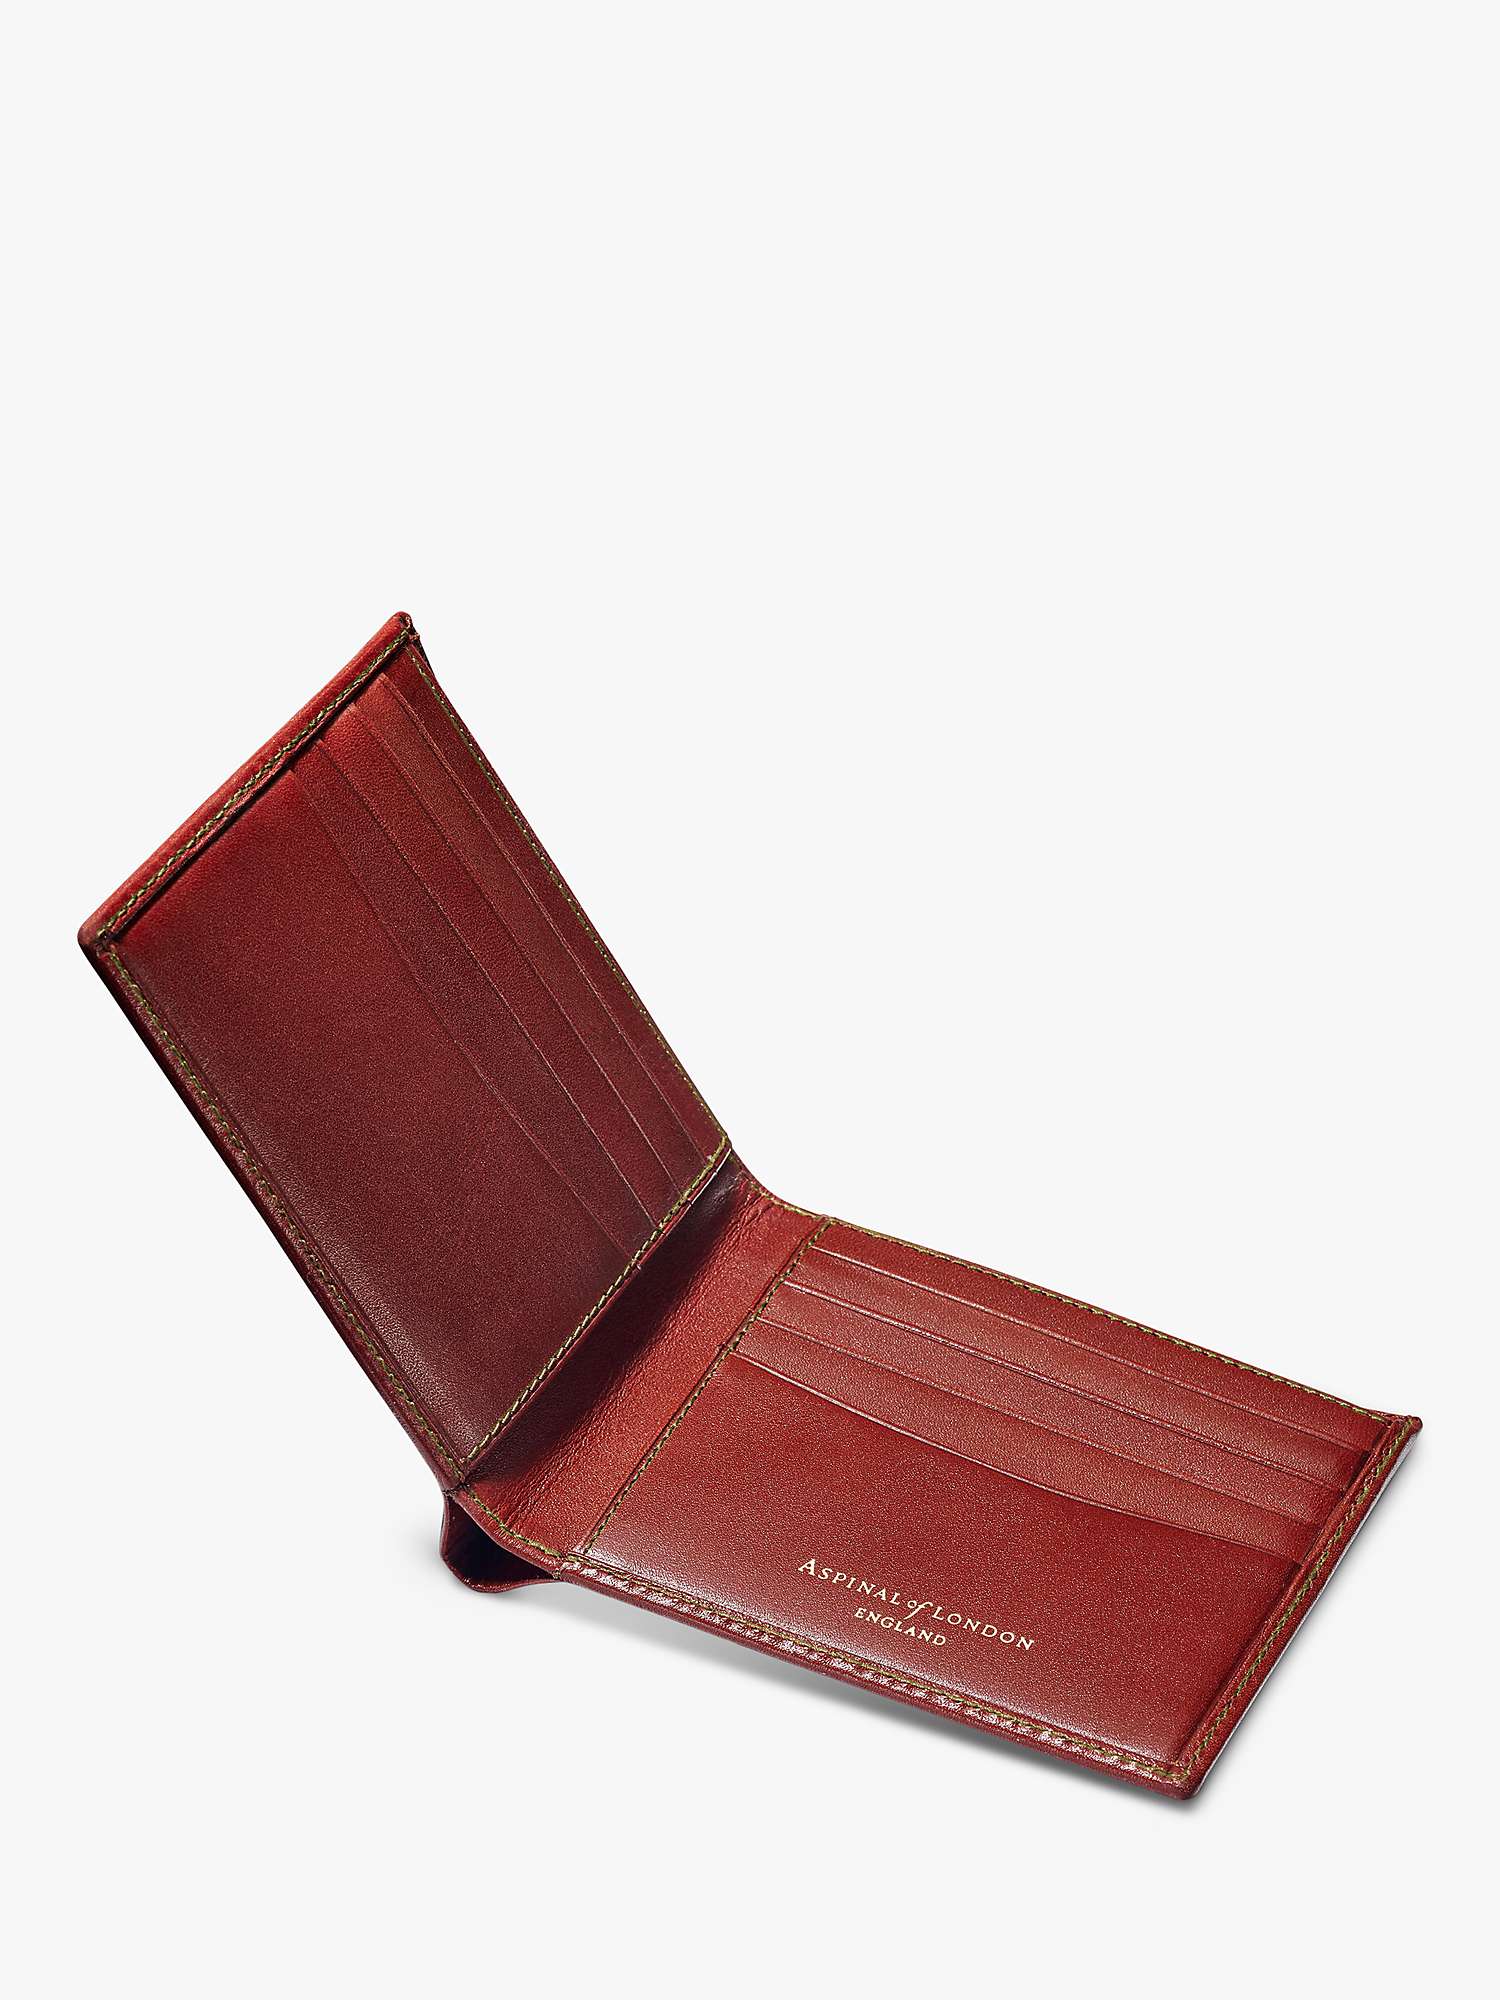 Buy Aspinal of London Classic Smooth Leather Billfold Wallet Online at johnlewis.com